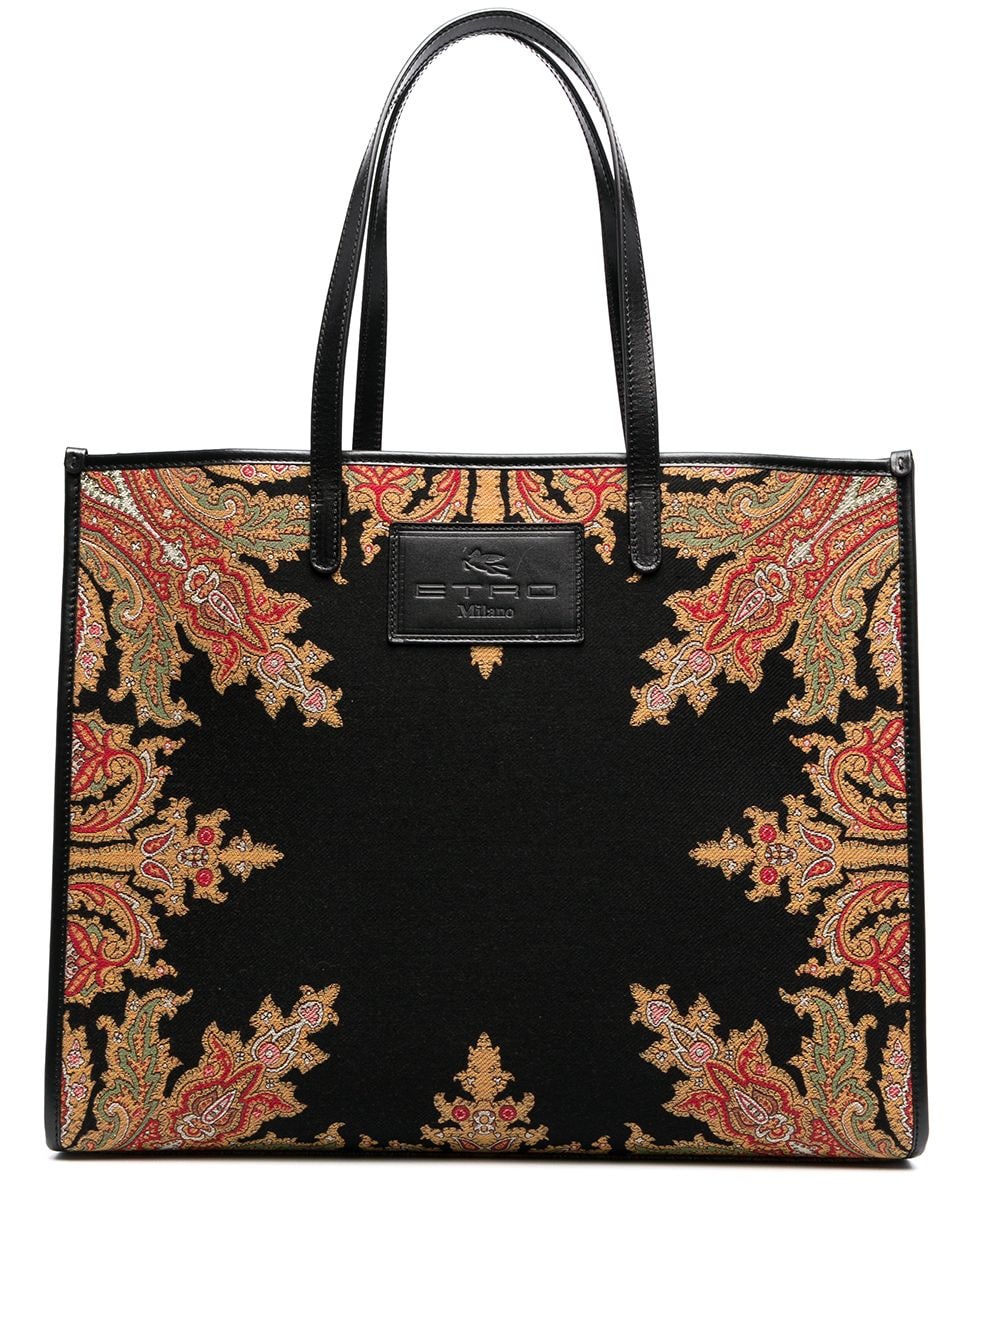 Beautiful Vintage ETRO MILANO Multicolored Paisley Leather Hand Bag Tote Bag